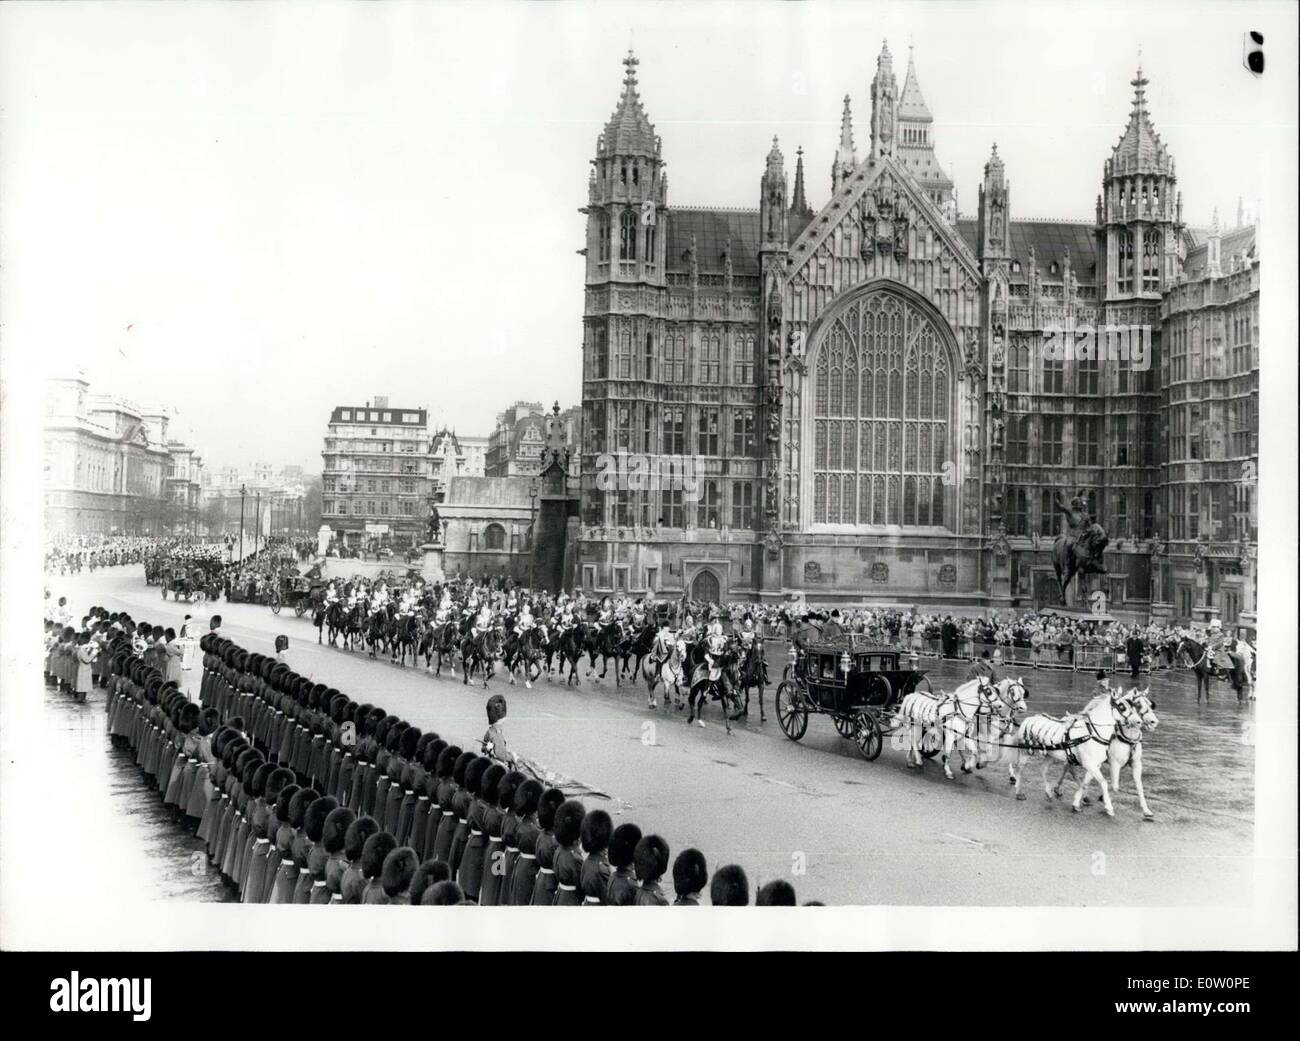 Nov. 01, 1960 - State Opening Of Parliament. Queen Arrives At Palace Of Westminster. Photo shows The scene as the Guards Officer dips the colours in salute - as the Irish State Coach carrying the Queen and Prince Philip approaches the Palace of Westminster for the State Opening of Parliament this morning. Part of Westminster Abbey can be seen in rear. Stock Photo